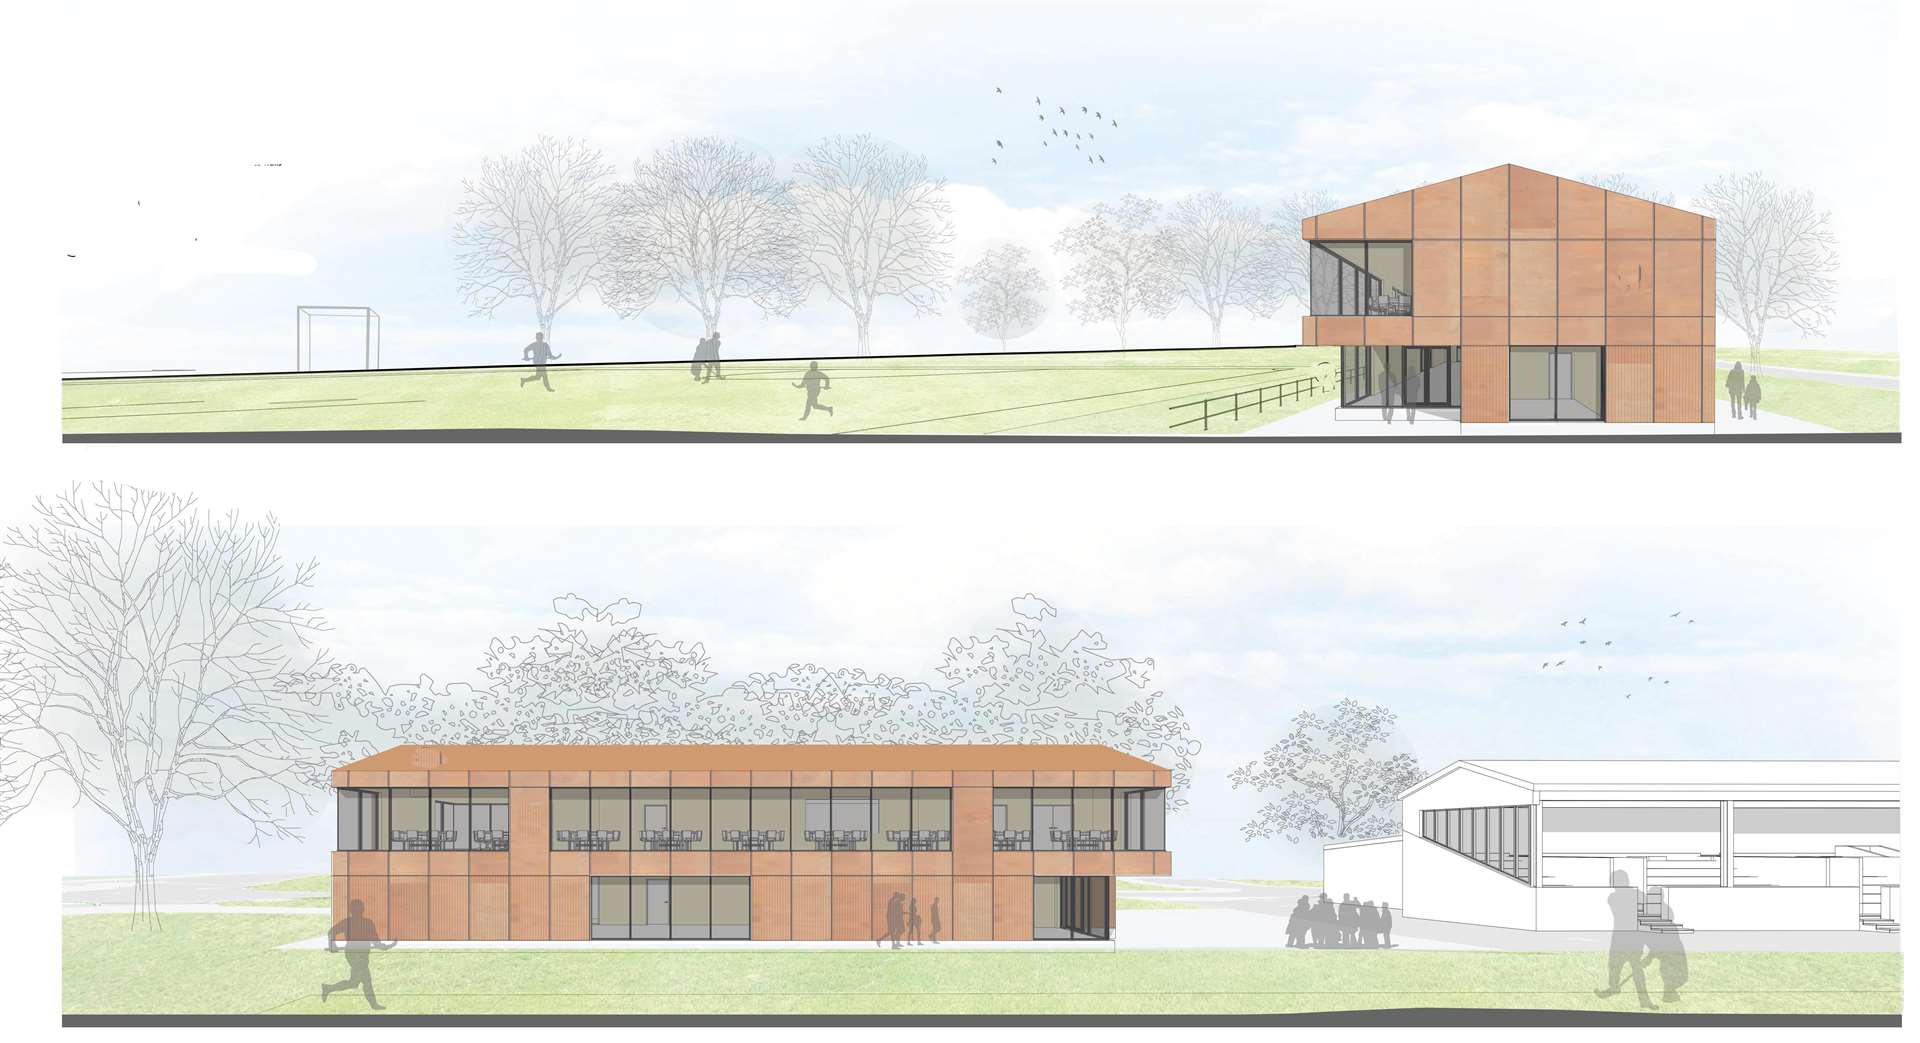 The new proposed pavilion at the Bught Park.